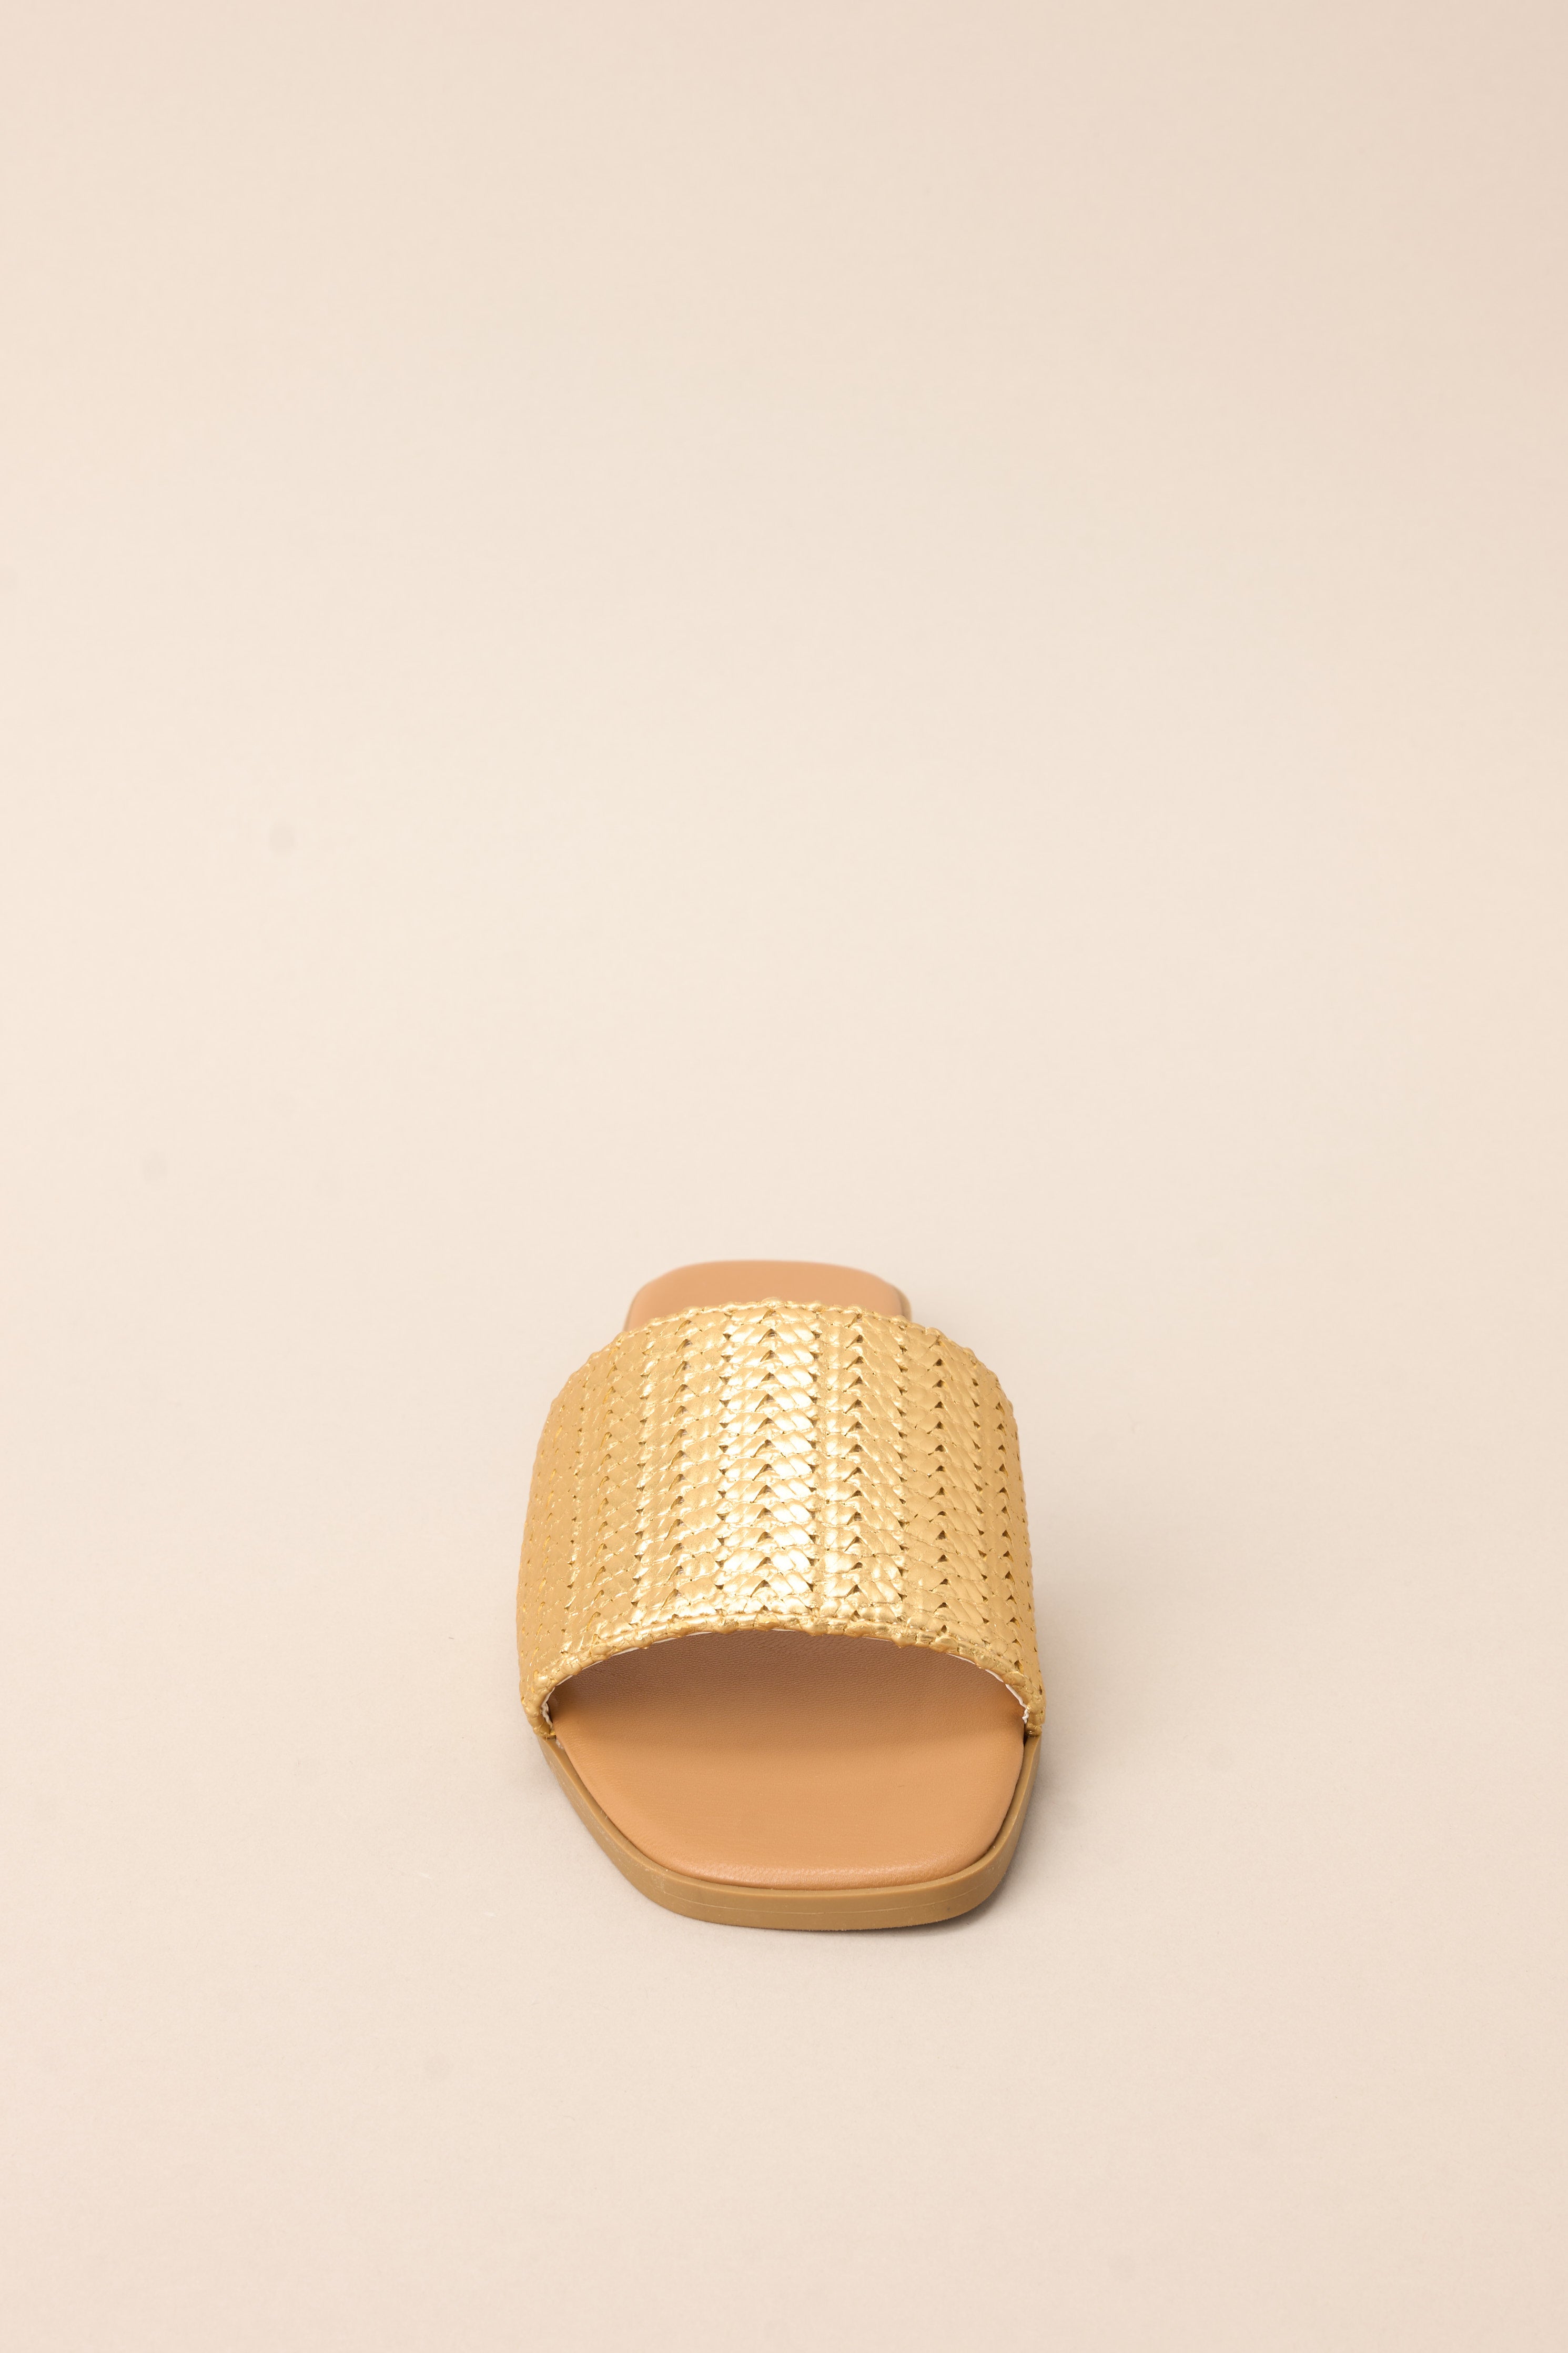 Front view of these sandals that feature a gold detailed strap over the foot and a slip-on style.